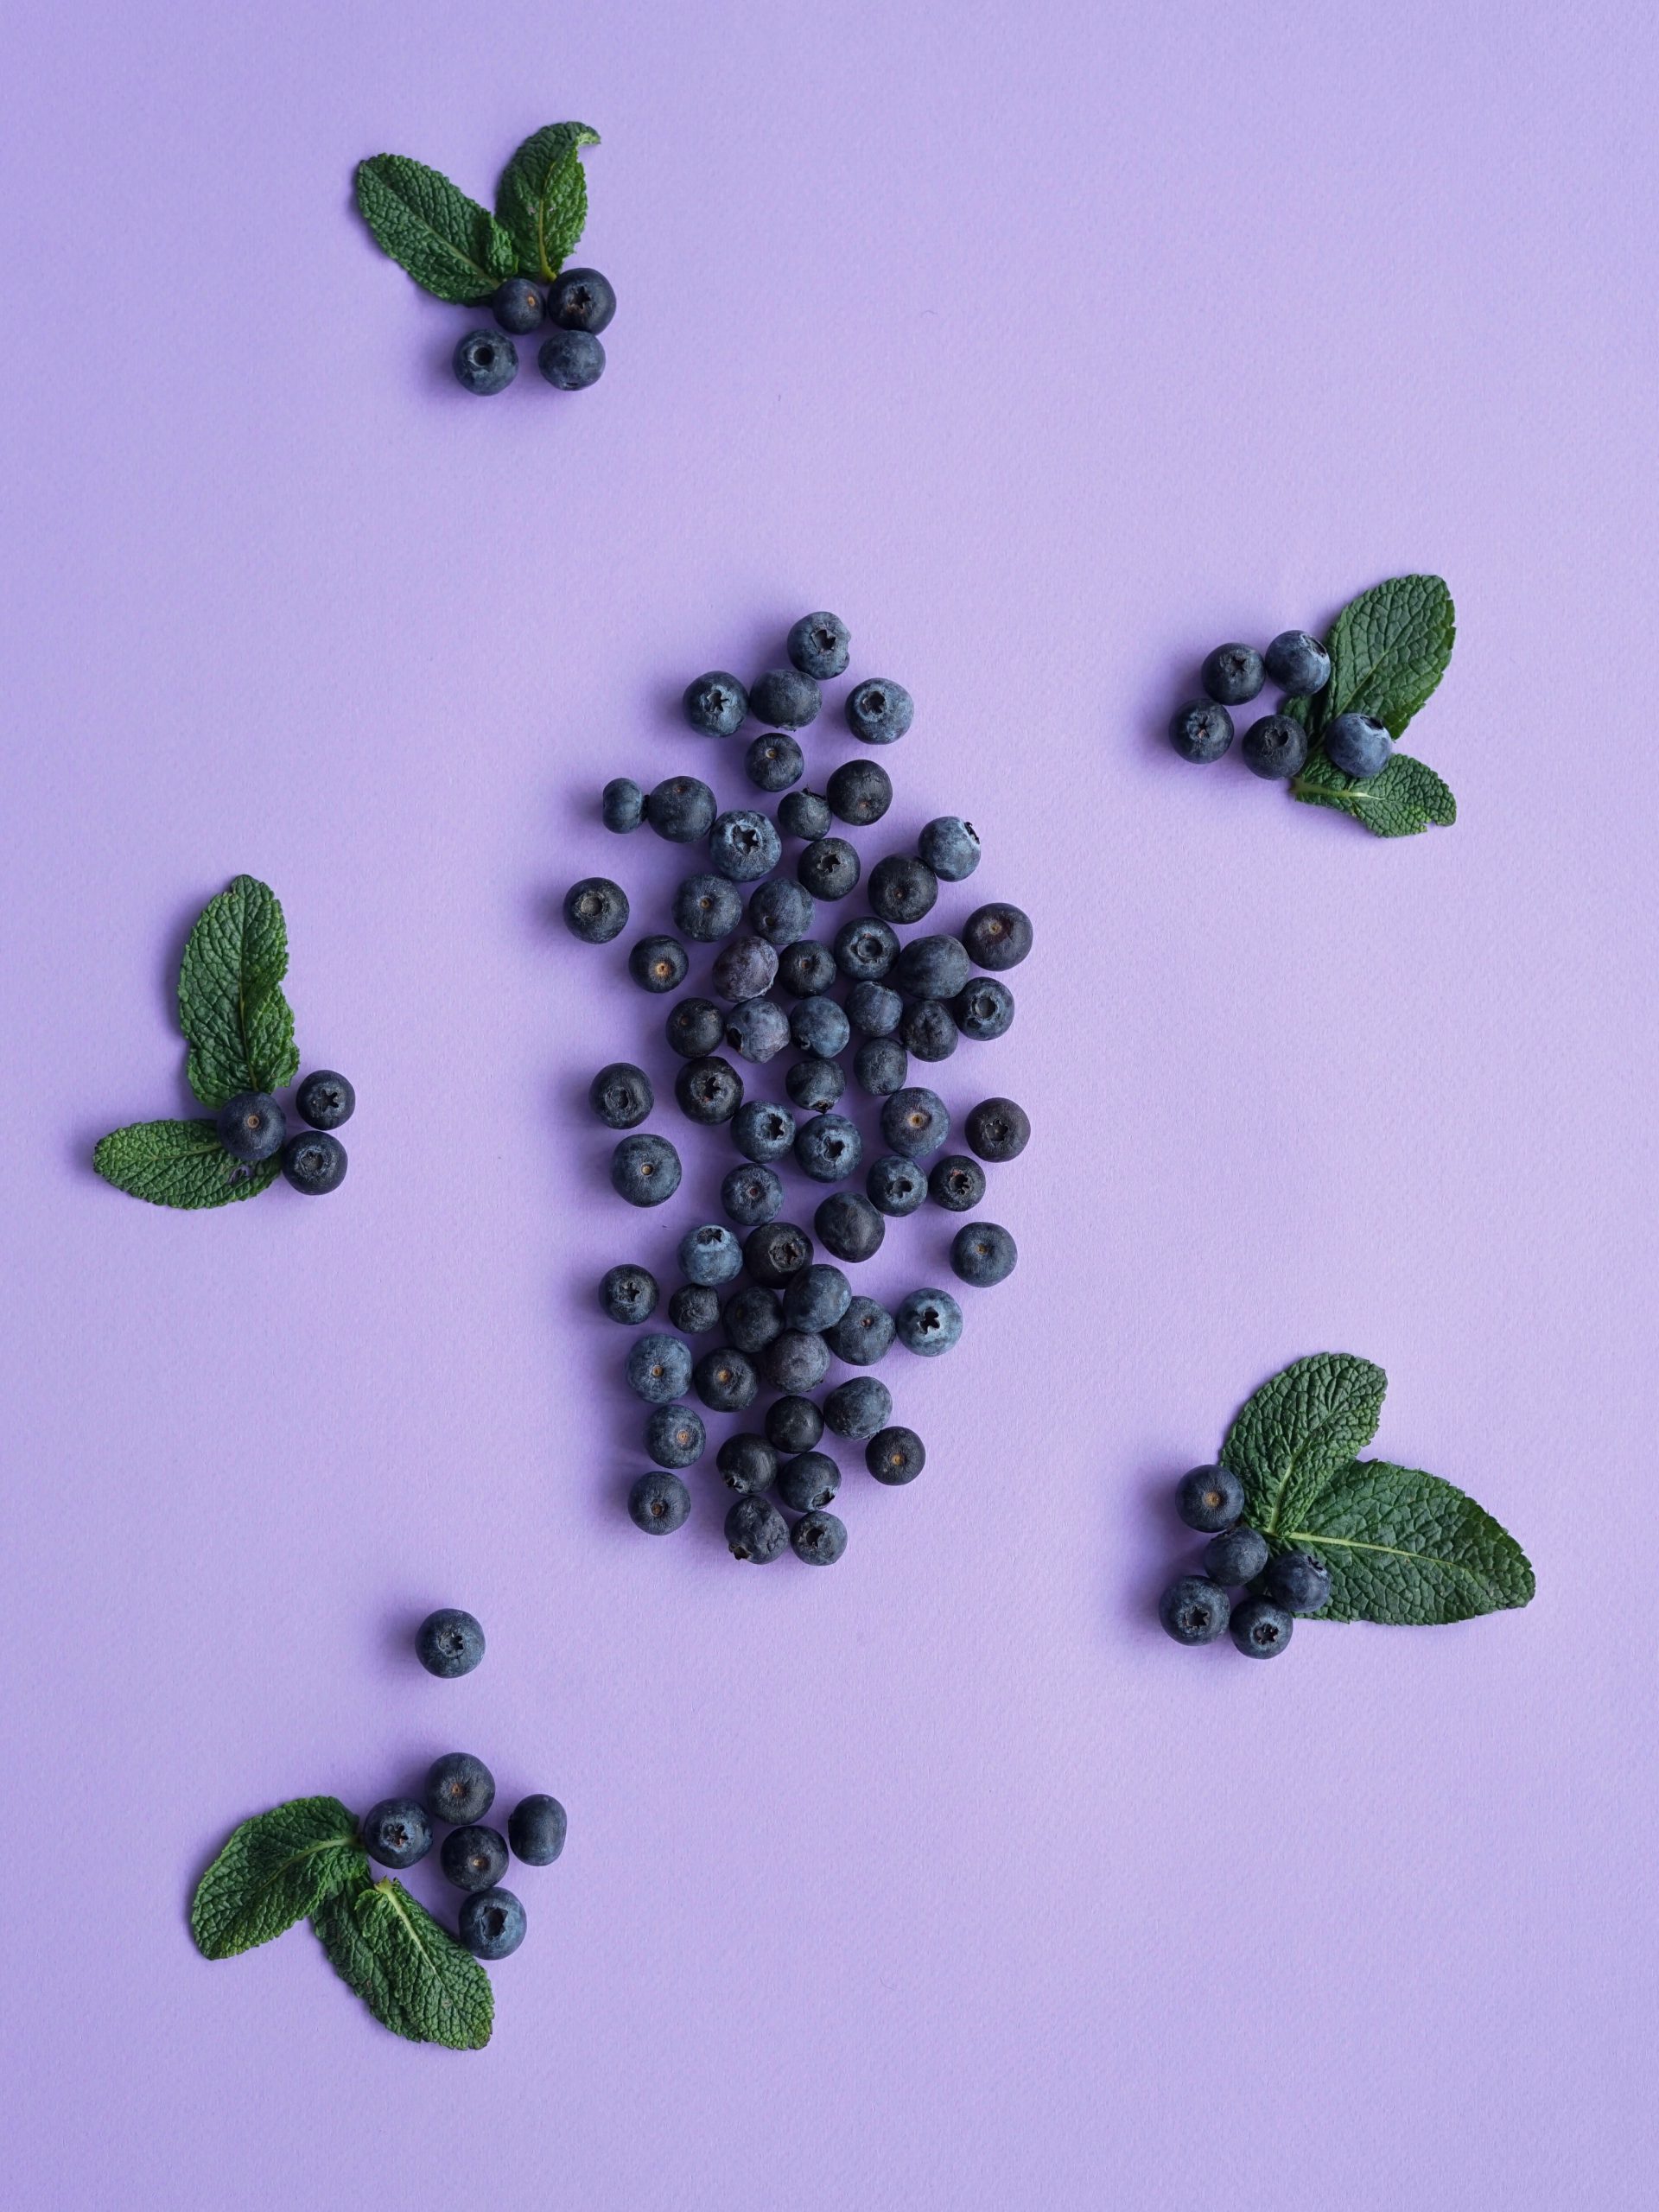 11 benefits of blueberries – backed by science (and 3 delicious blueberry recipes)